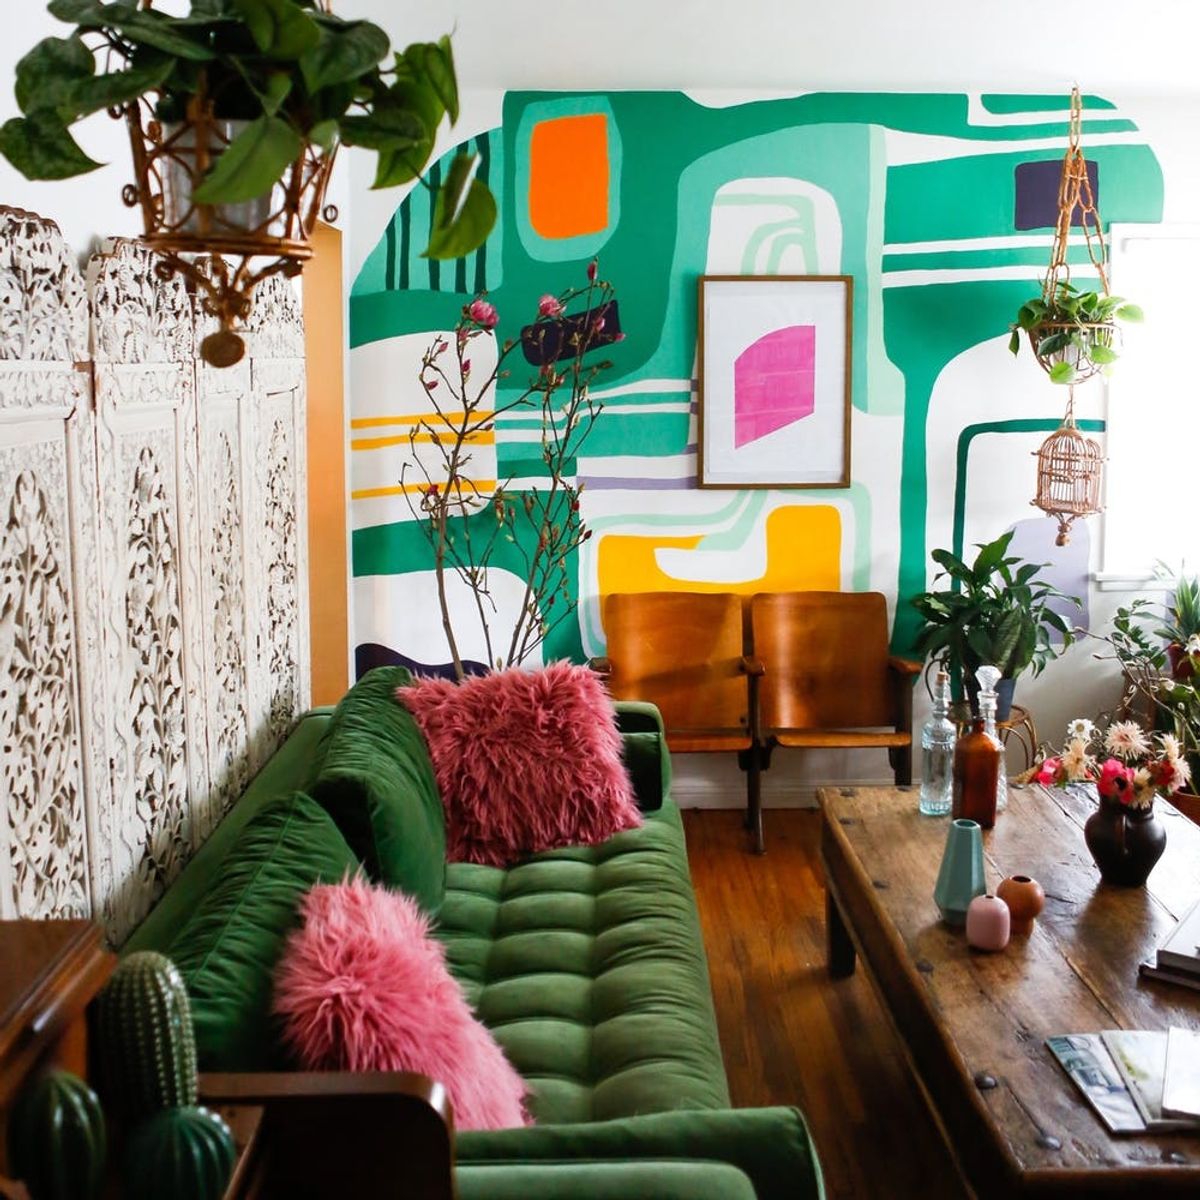 This LA Blogger Packs So Much Color in 900 Square Feet